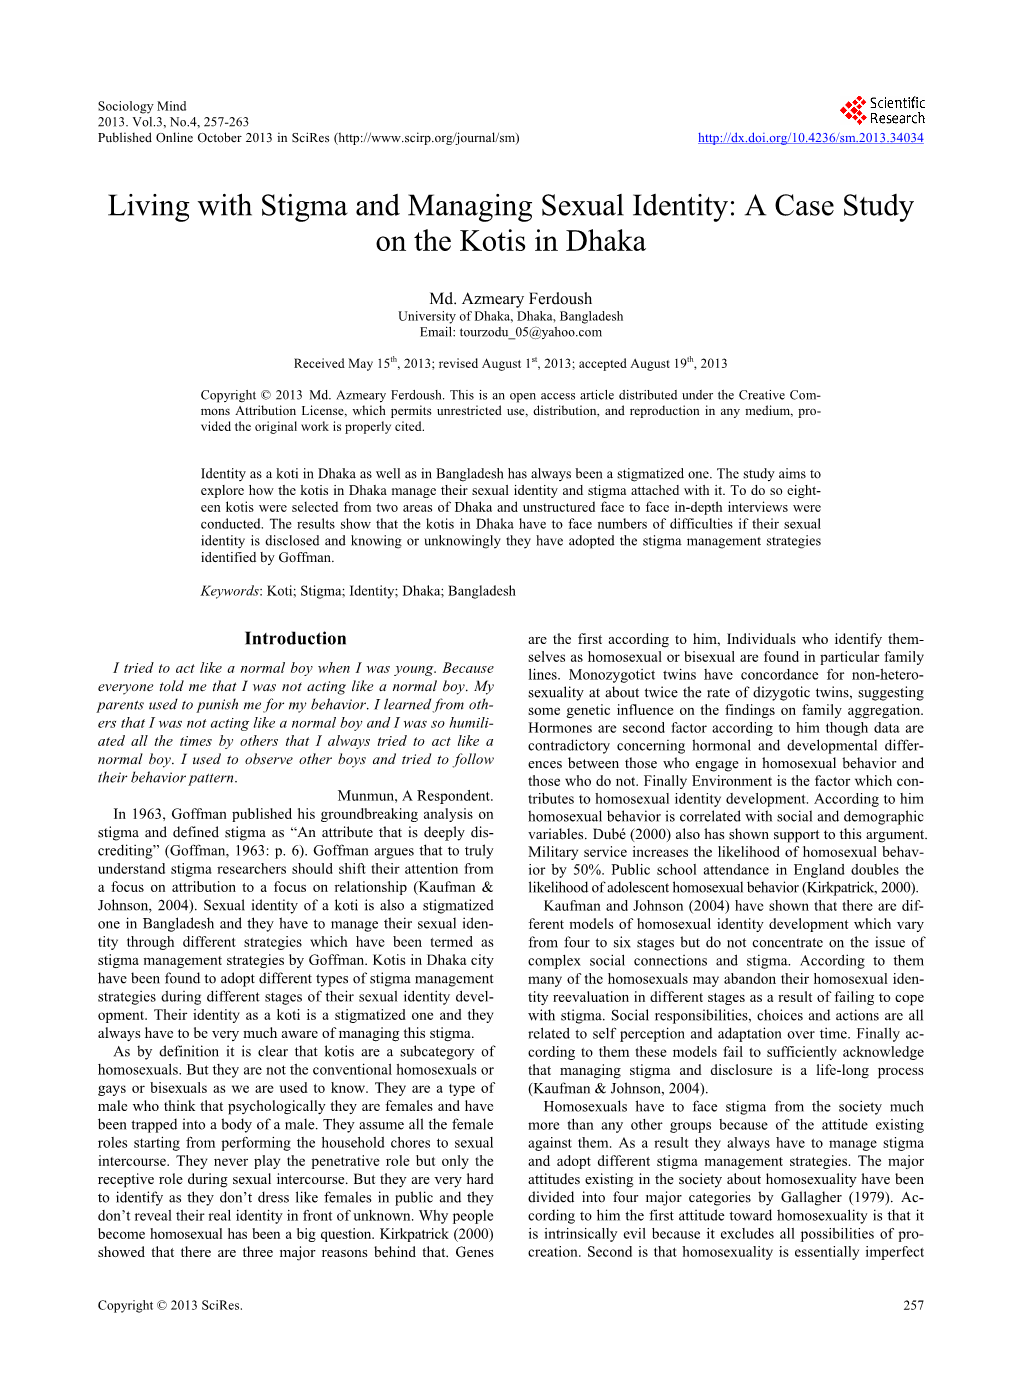 Living with Stigma and Managing Sexual Identity: a Case Study on the Kotis in Dhaka